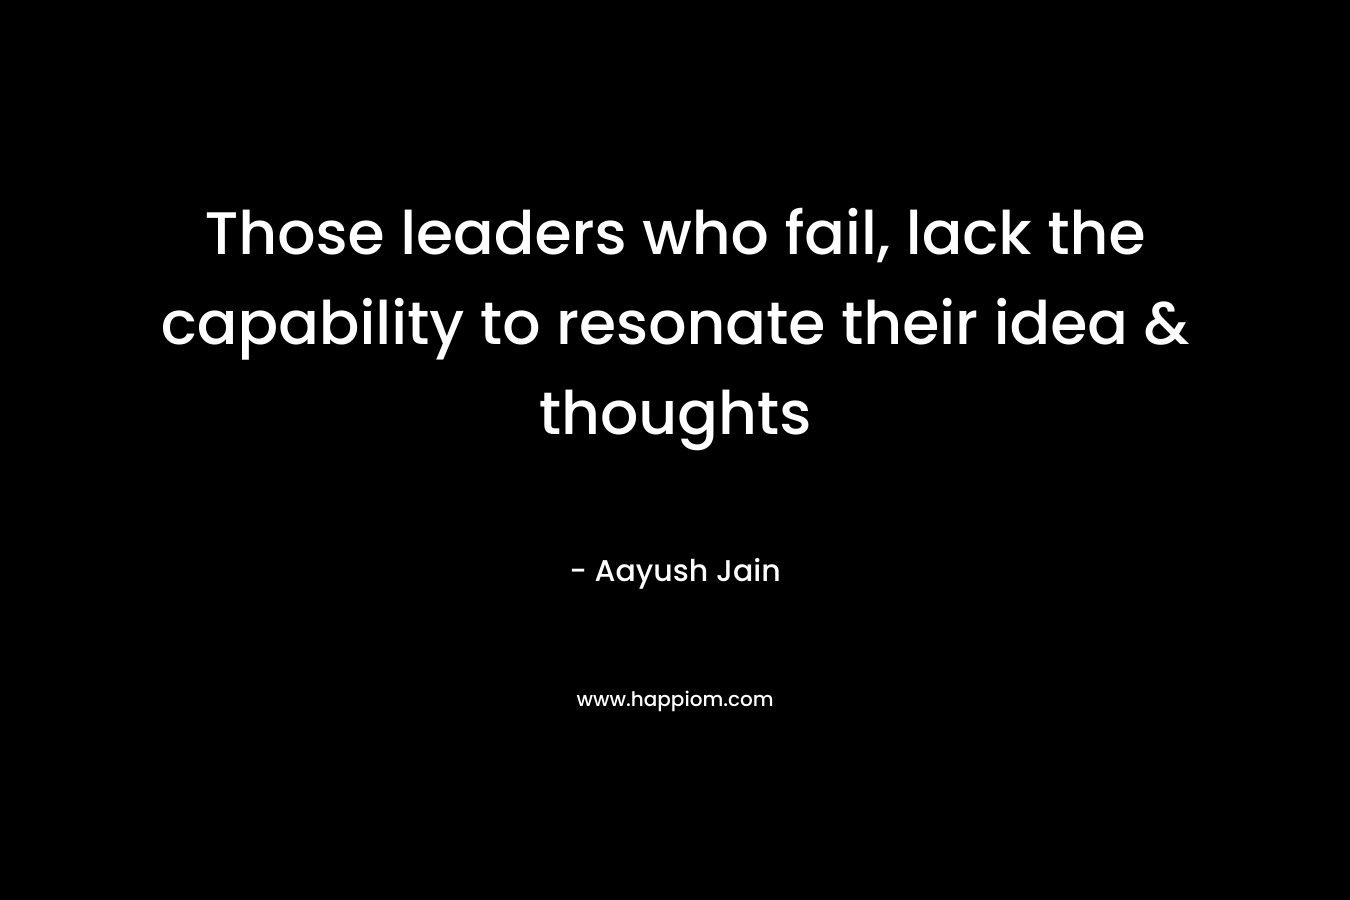 Those leaders who fail, lack the capability to resonate their idea & thoughts